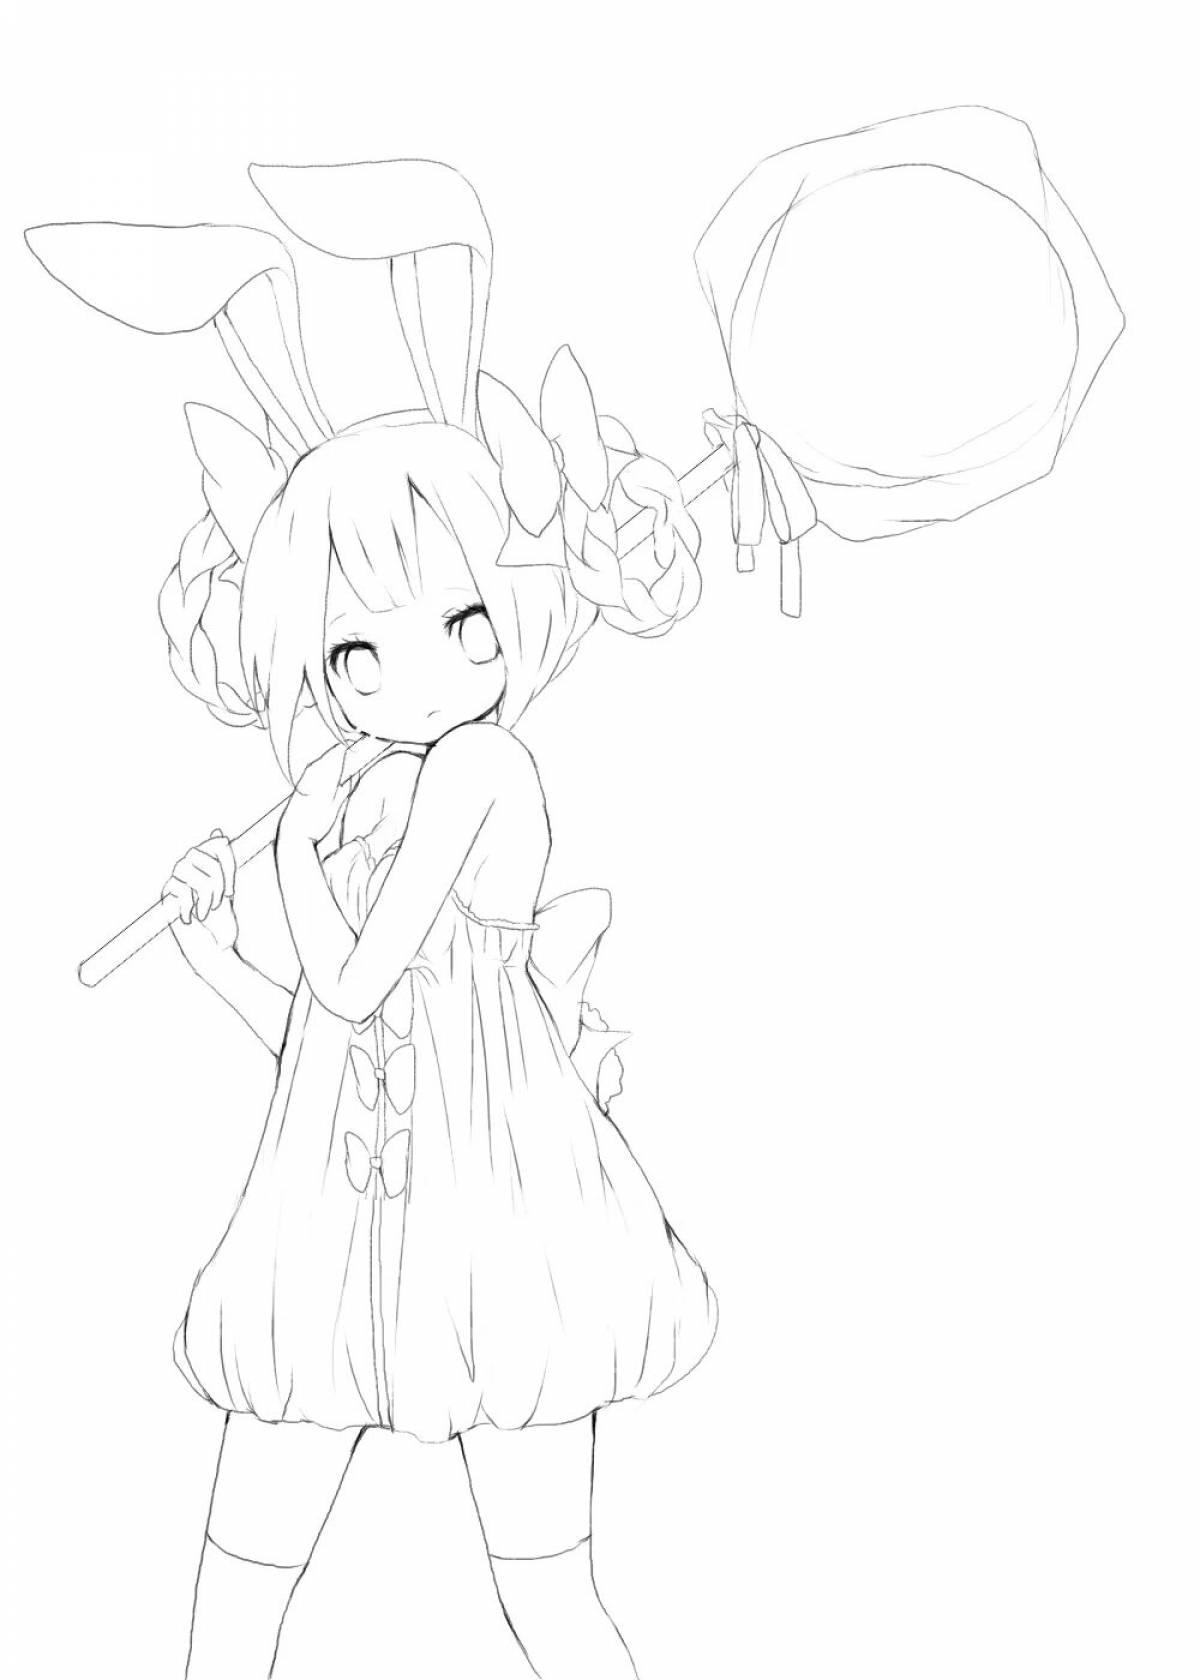 Humorous anime rabbit coloring page